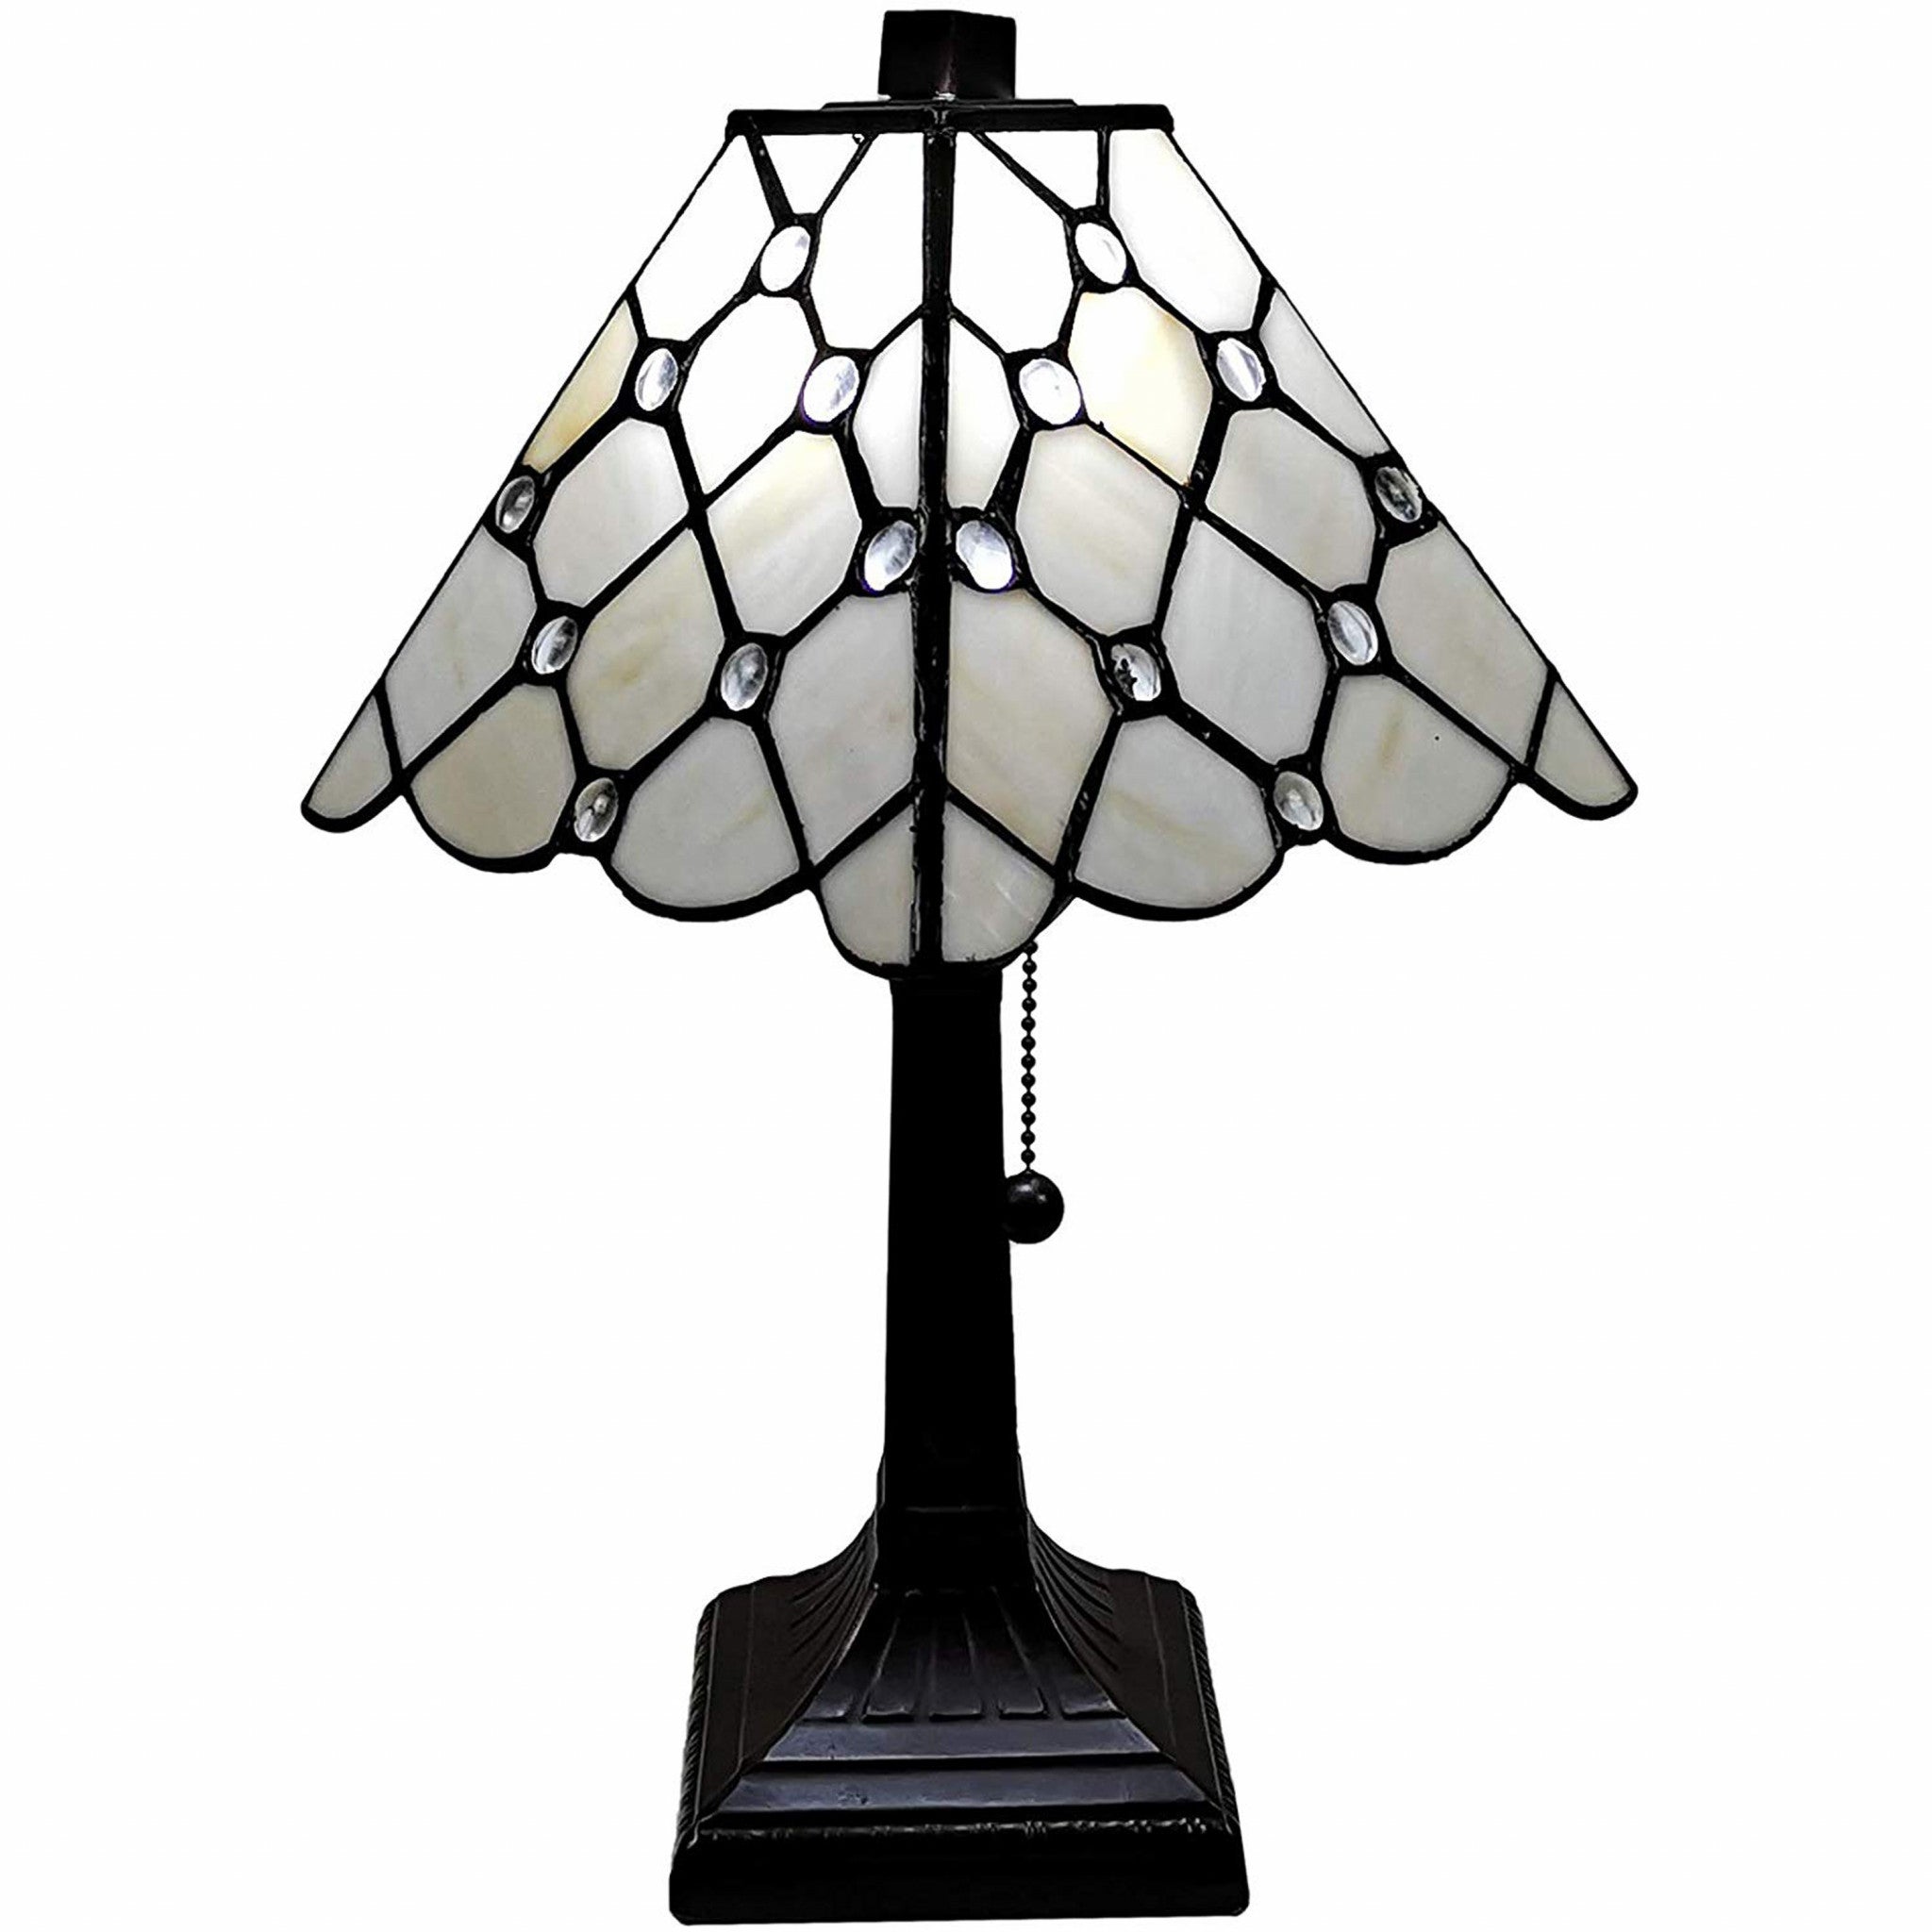 15" Dark Brown Metal Candlestick Table Lamp With White Empire Shade